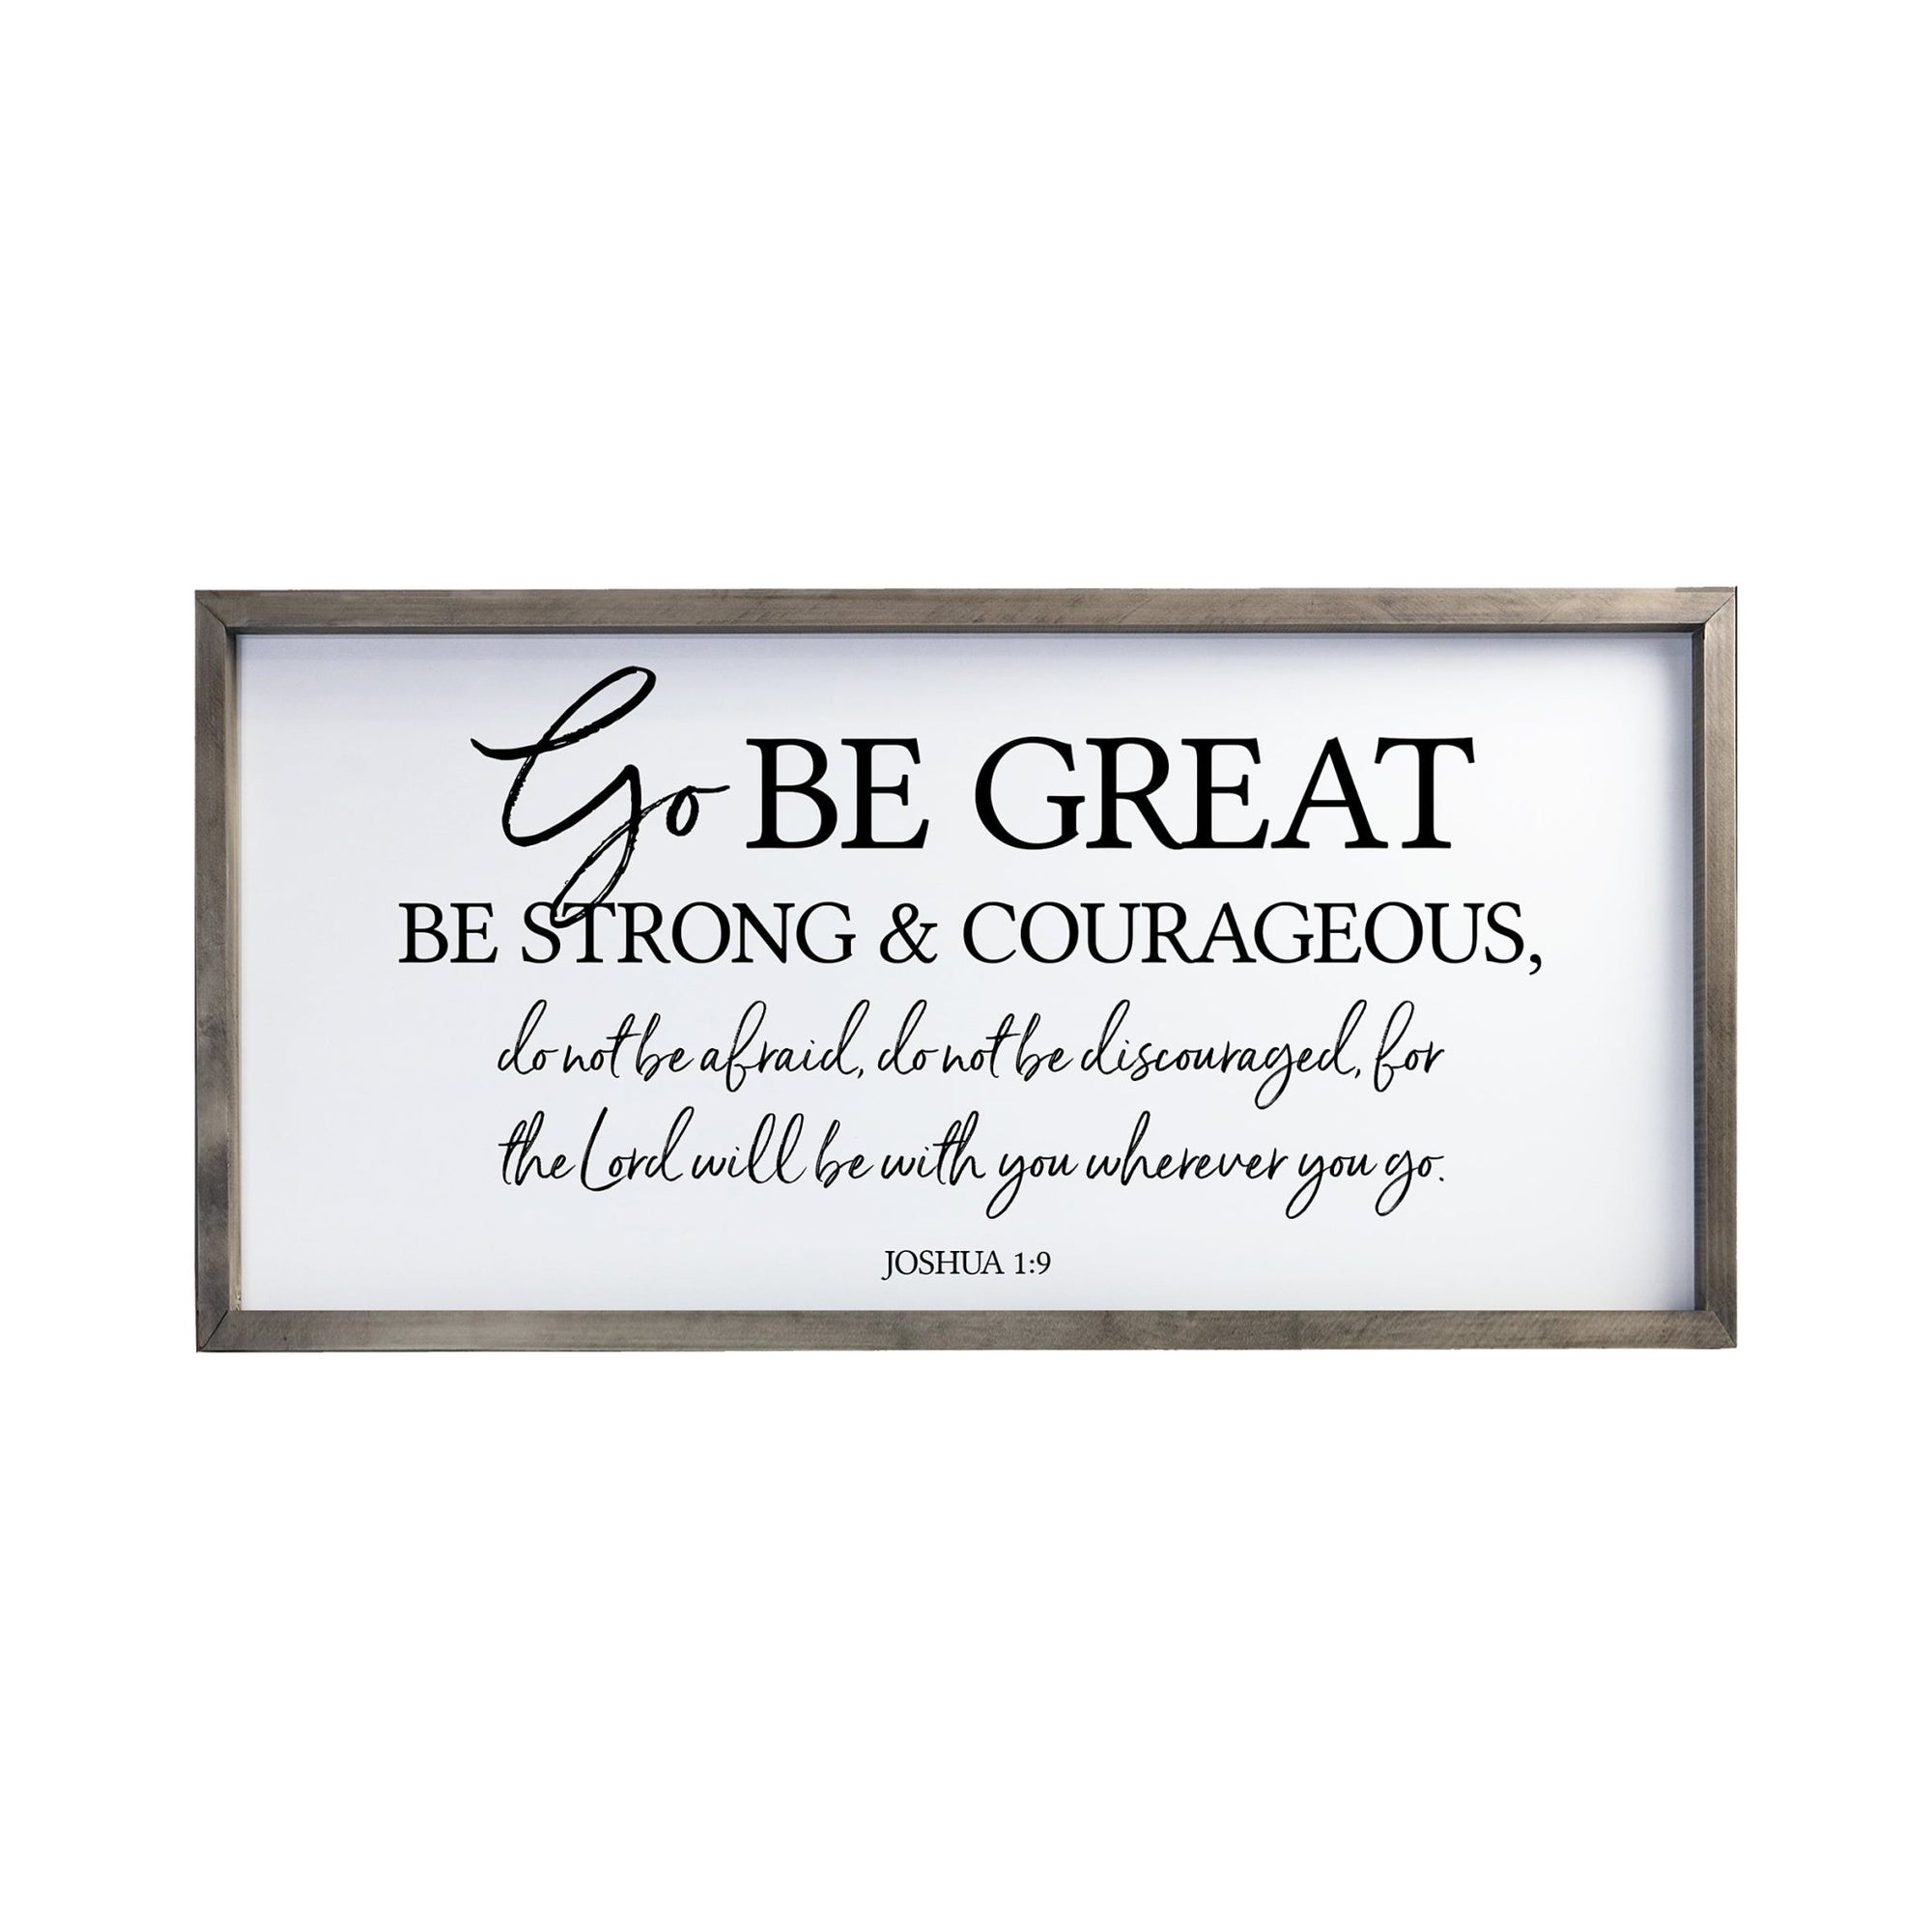 Large Family Wall Decor Quote Sign For Home 18 x 36 - Go Be Great - LifeSong Milestones